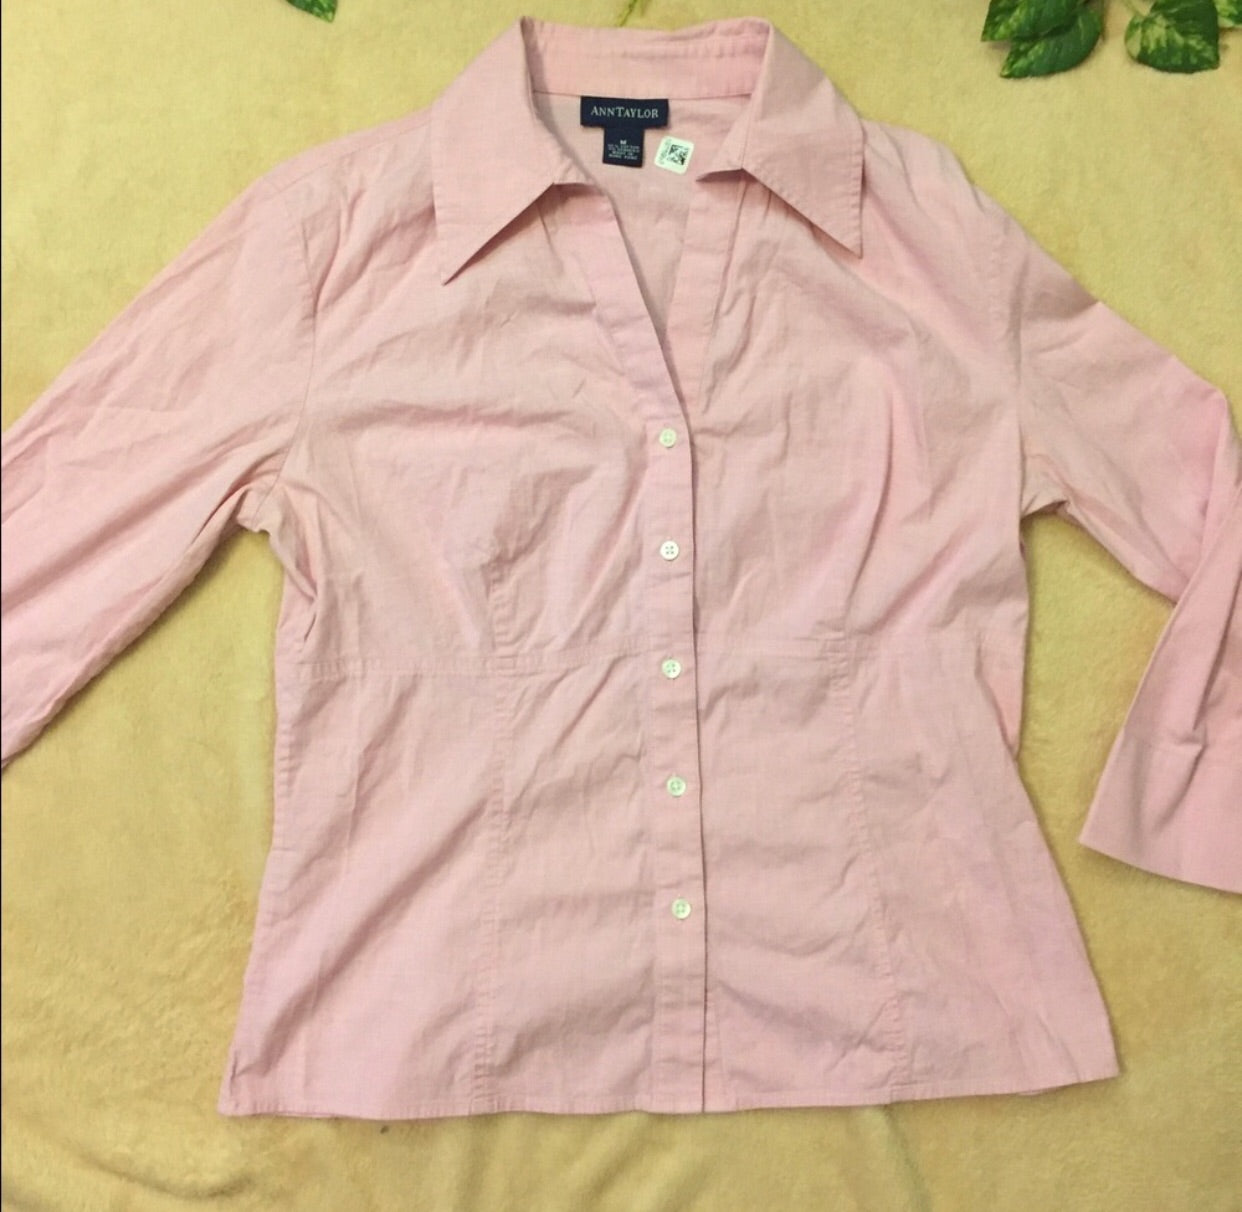 Ann Taylor Oxford Button Up Blouse, US Size Medium - Gently Used